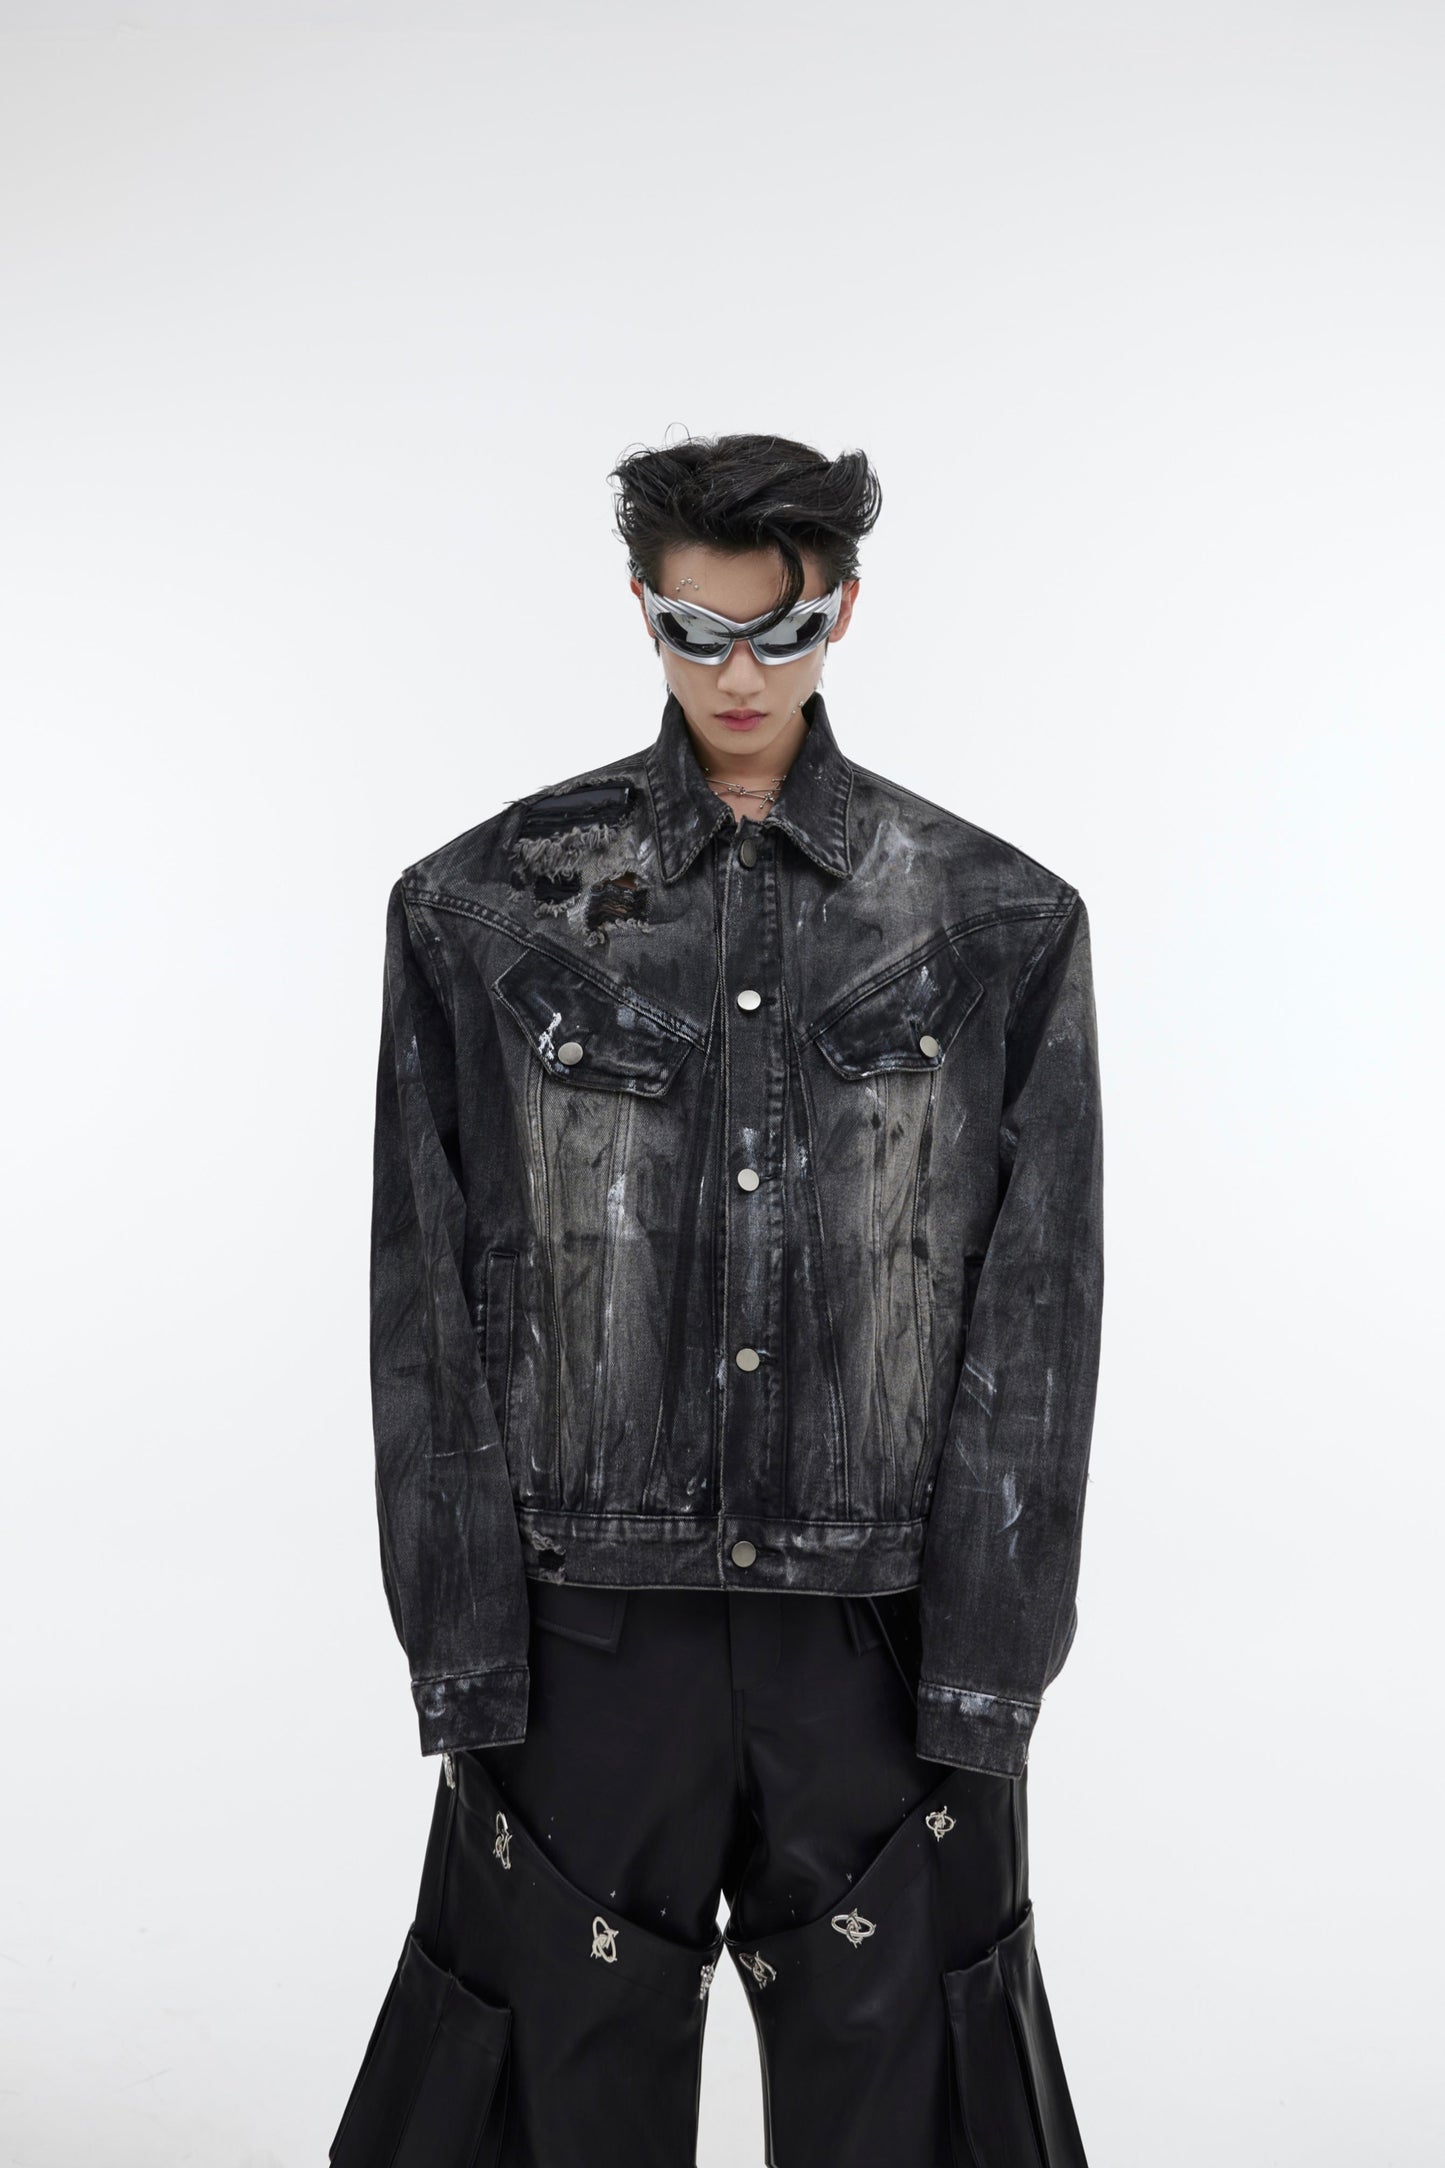 Heavy Industry Hand-painted Distressed Denim Jacket | ARGUE CULTURE Collection [H436]